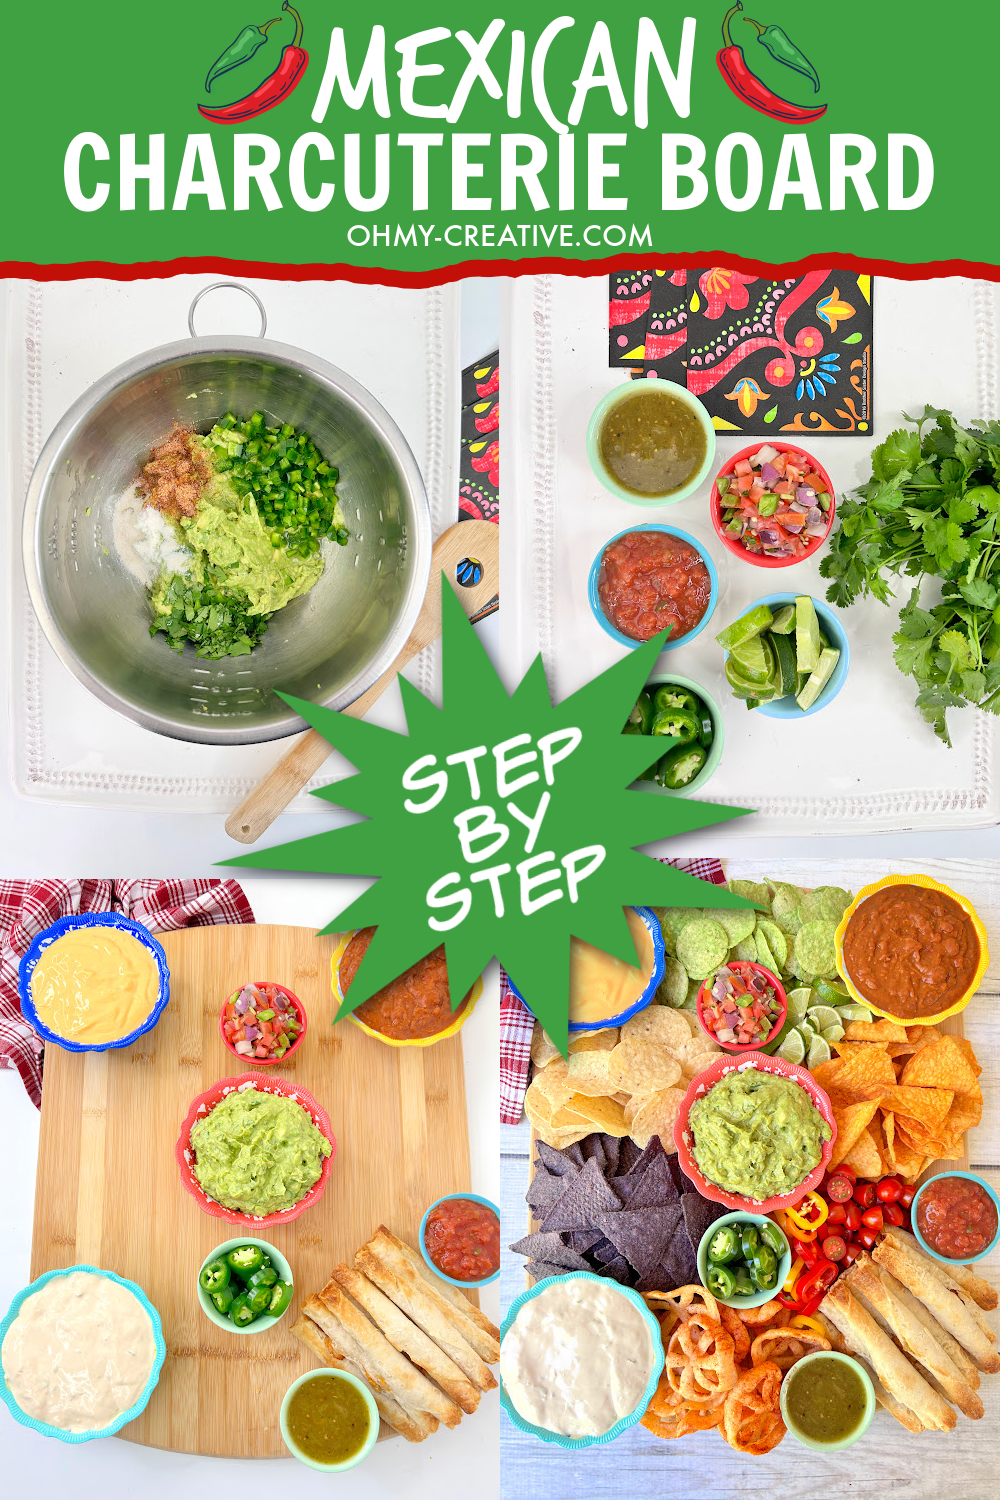 How to make a Mexican charcuterie board step by step with photos of each step in this collage.